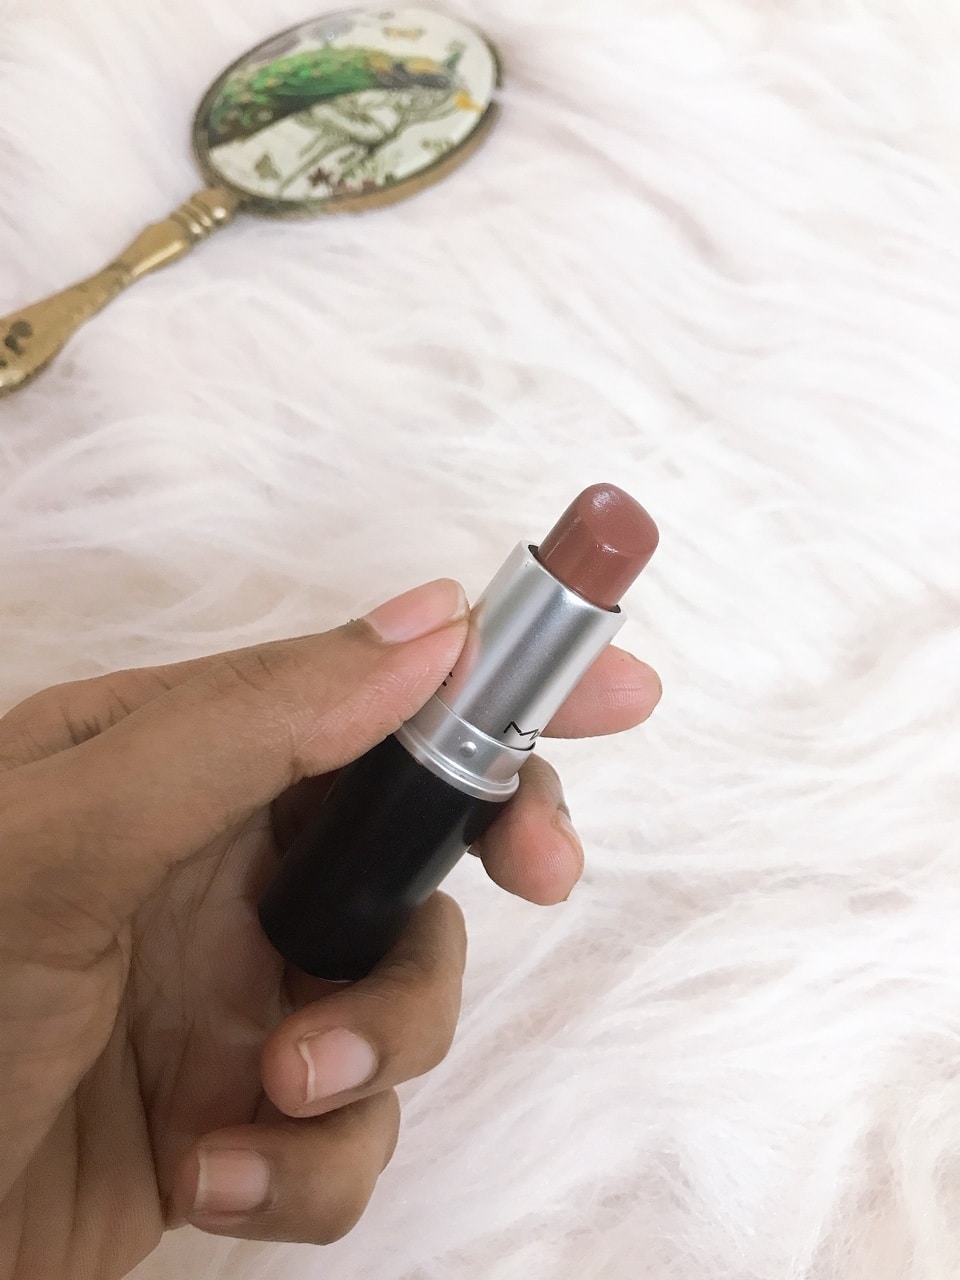 MAC Lustre Lipstick Touch Review